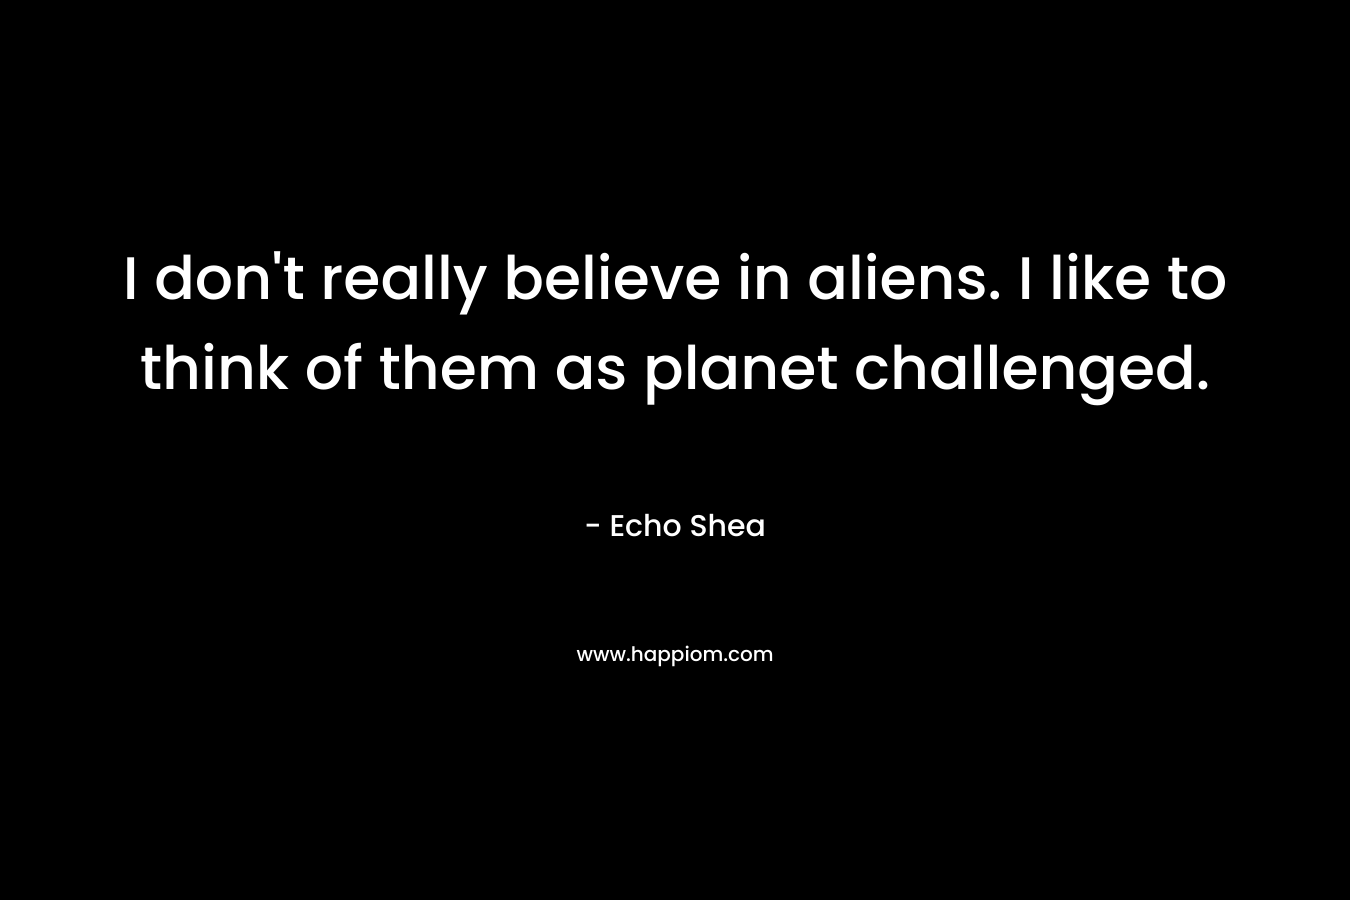 I don’t really believe in aliens. I like to think of them as planet challenged. – Echo Shea